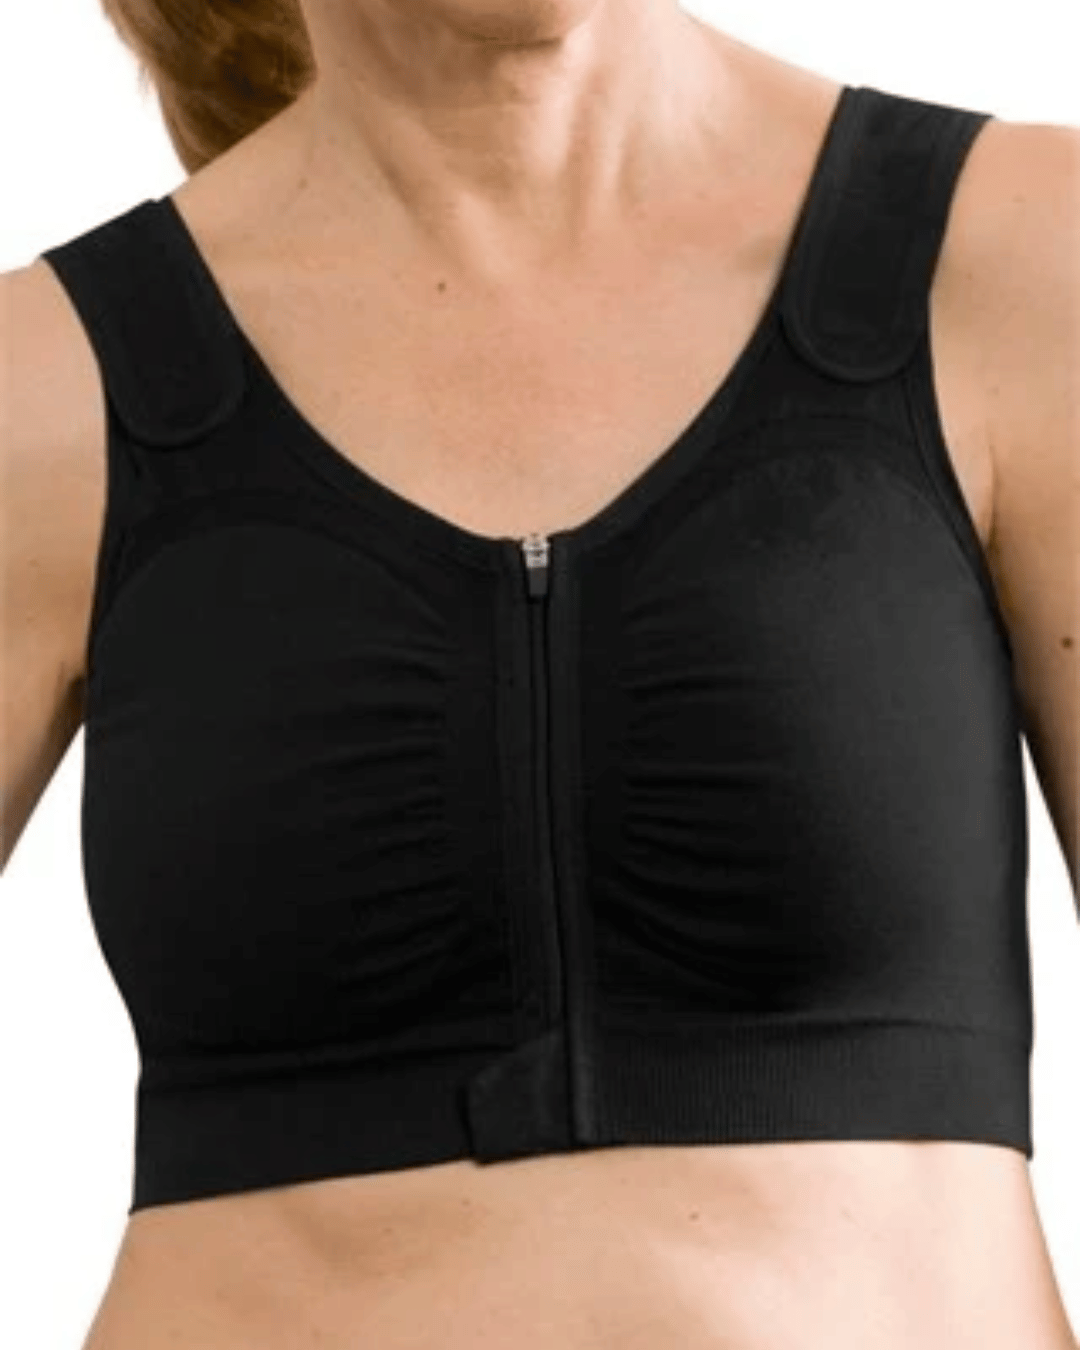 The Amoena Leyla Seamless Surgical Bra offers optimal comfort and support during post-surgical recovery. Its seamless design and soft fabric provide a gentle feel against the skin. Featuring bilateral pockets, it is compatible with breast forms or prostheses. Choose the Leyla bra for a seamless and comfortable healing experience.